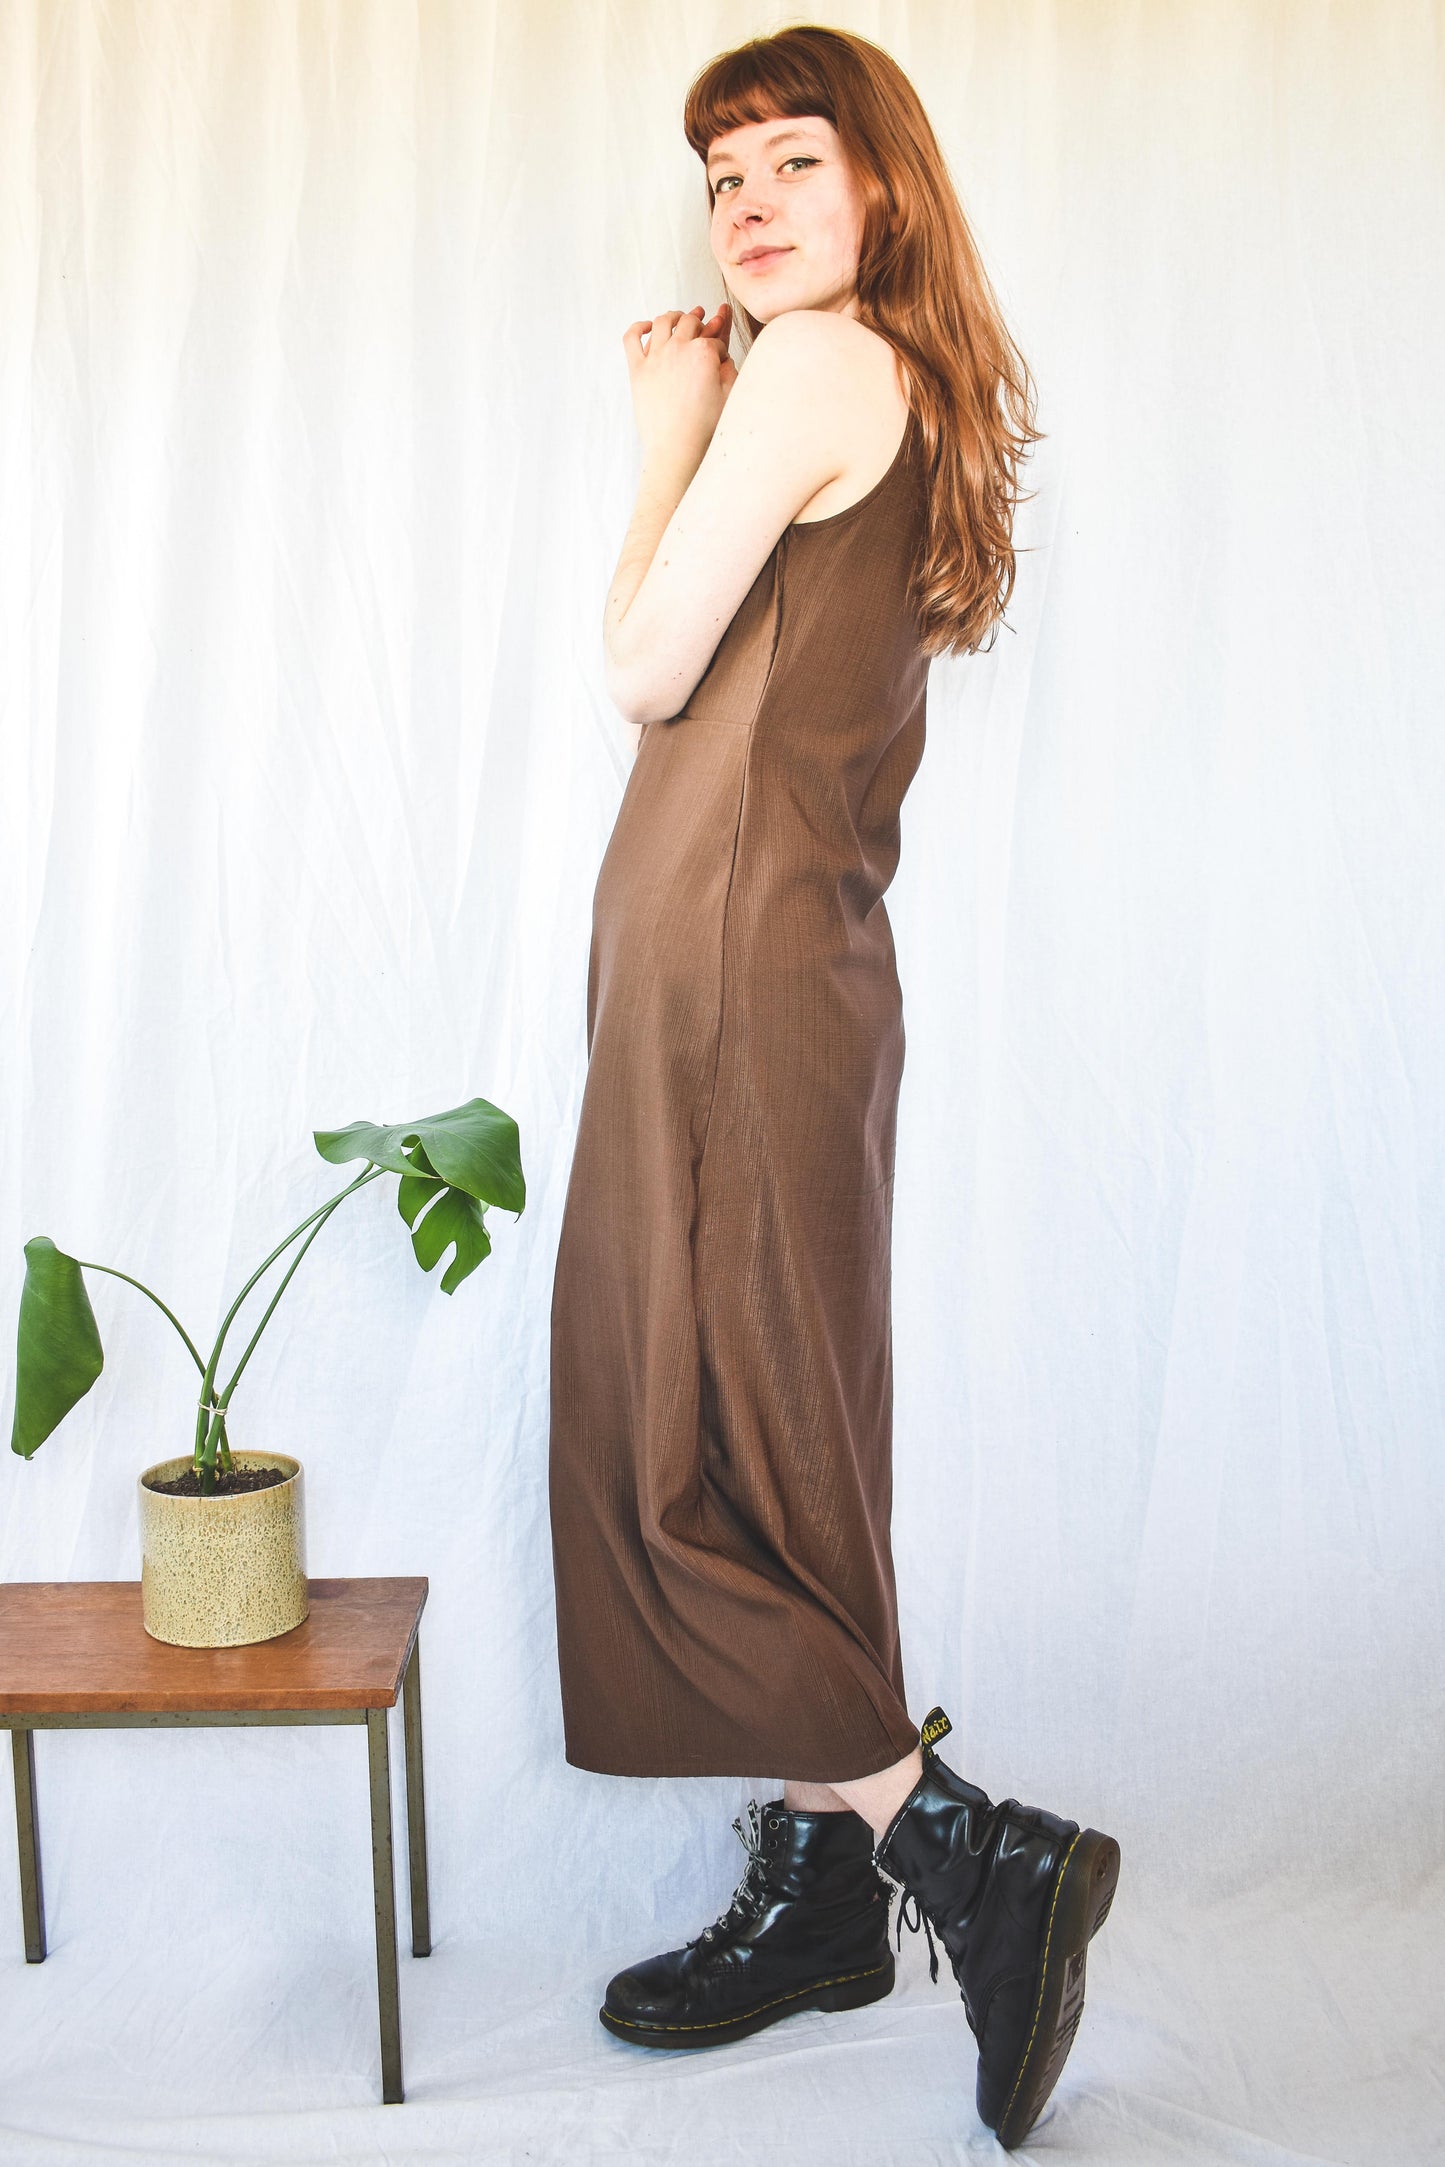 NEW IN! Brown dress